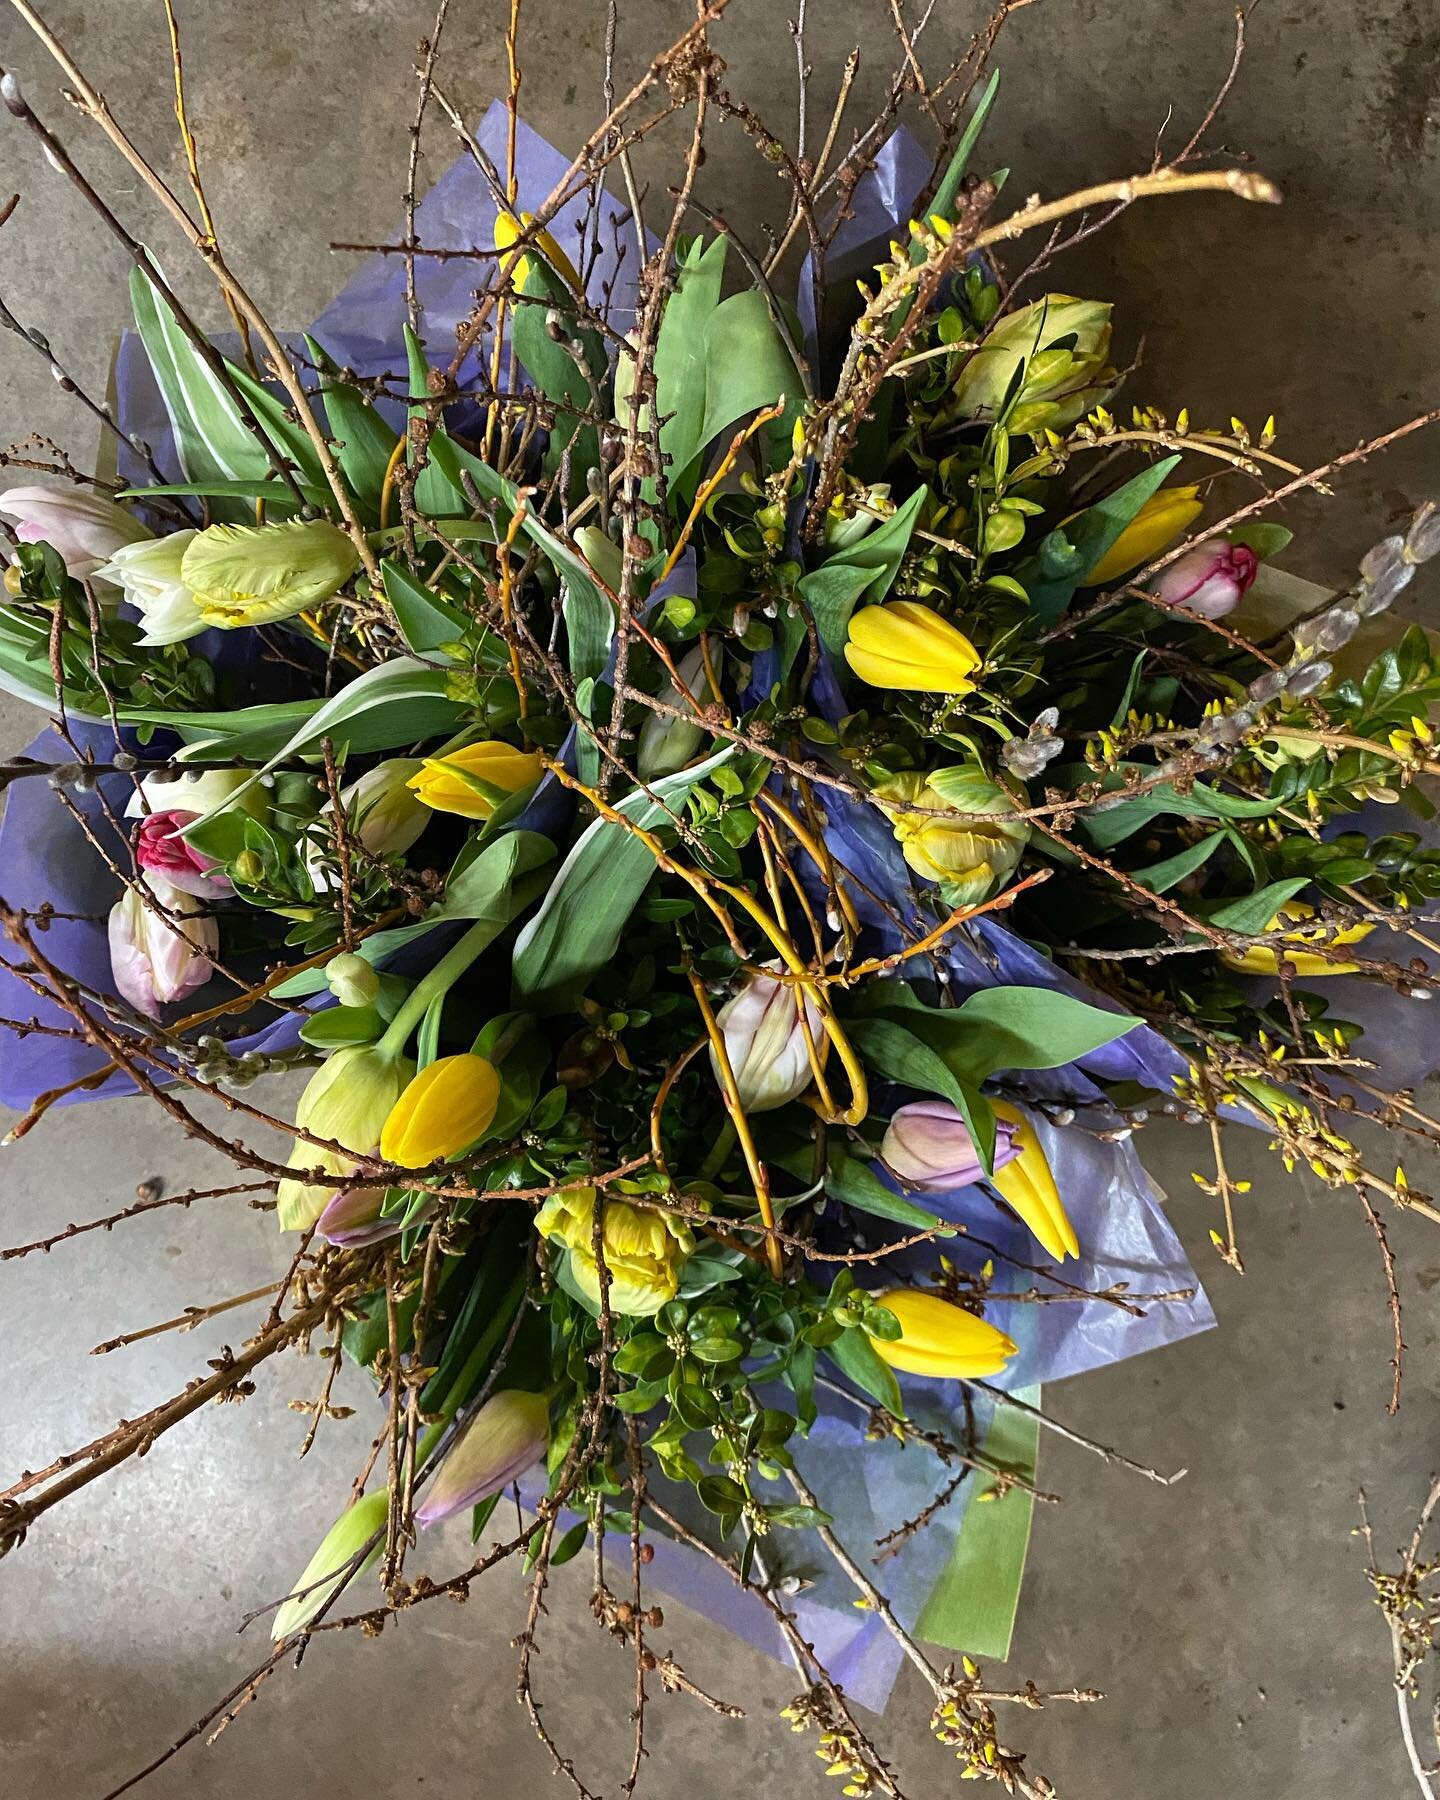 First Easter bouquets are ready to leave my workshop today.
We will be in full swing today to get ready for @lunenburgfarmersmarket tomorrow 8:30-12.
Don&rsquo;t miss out the big selection, not only of Easter arrangements, but also everything you nee